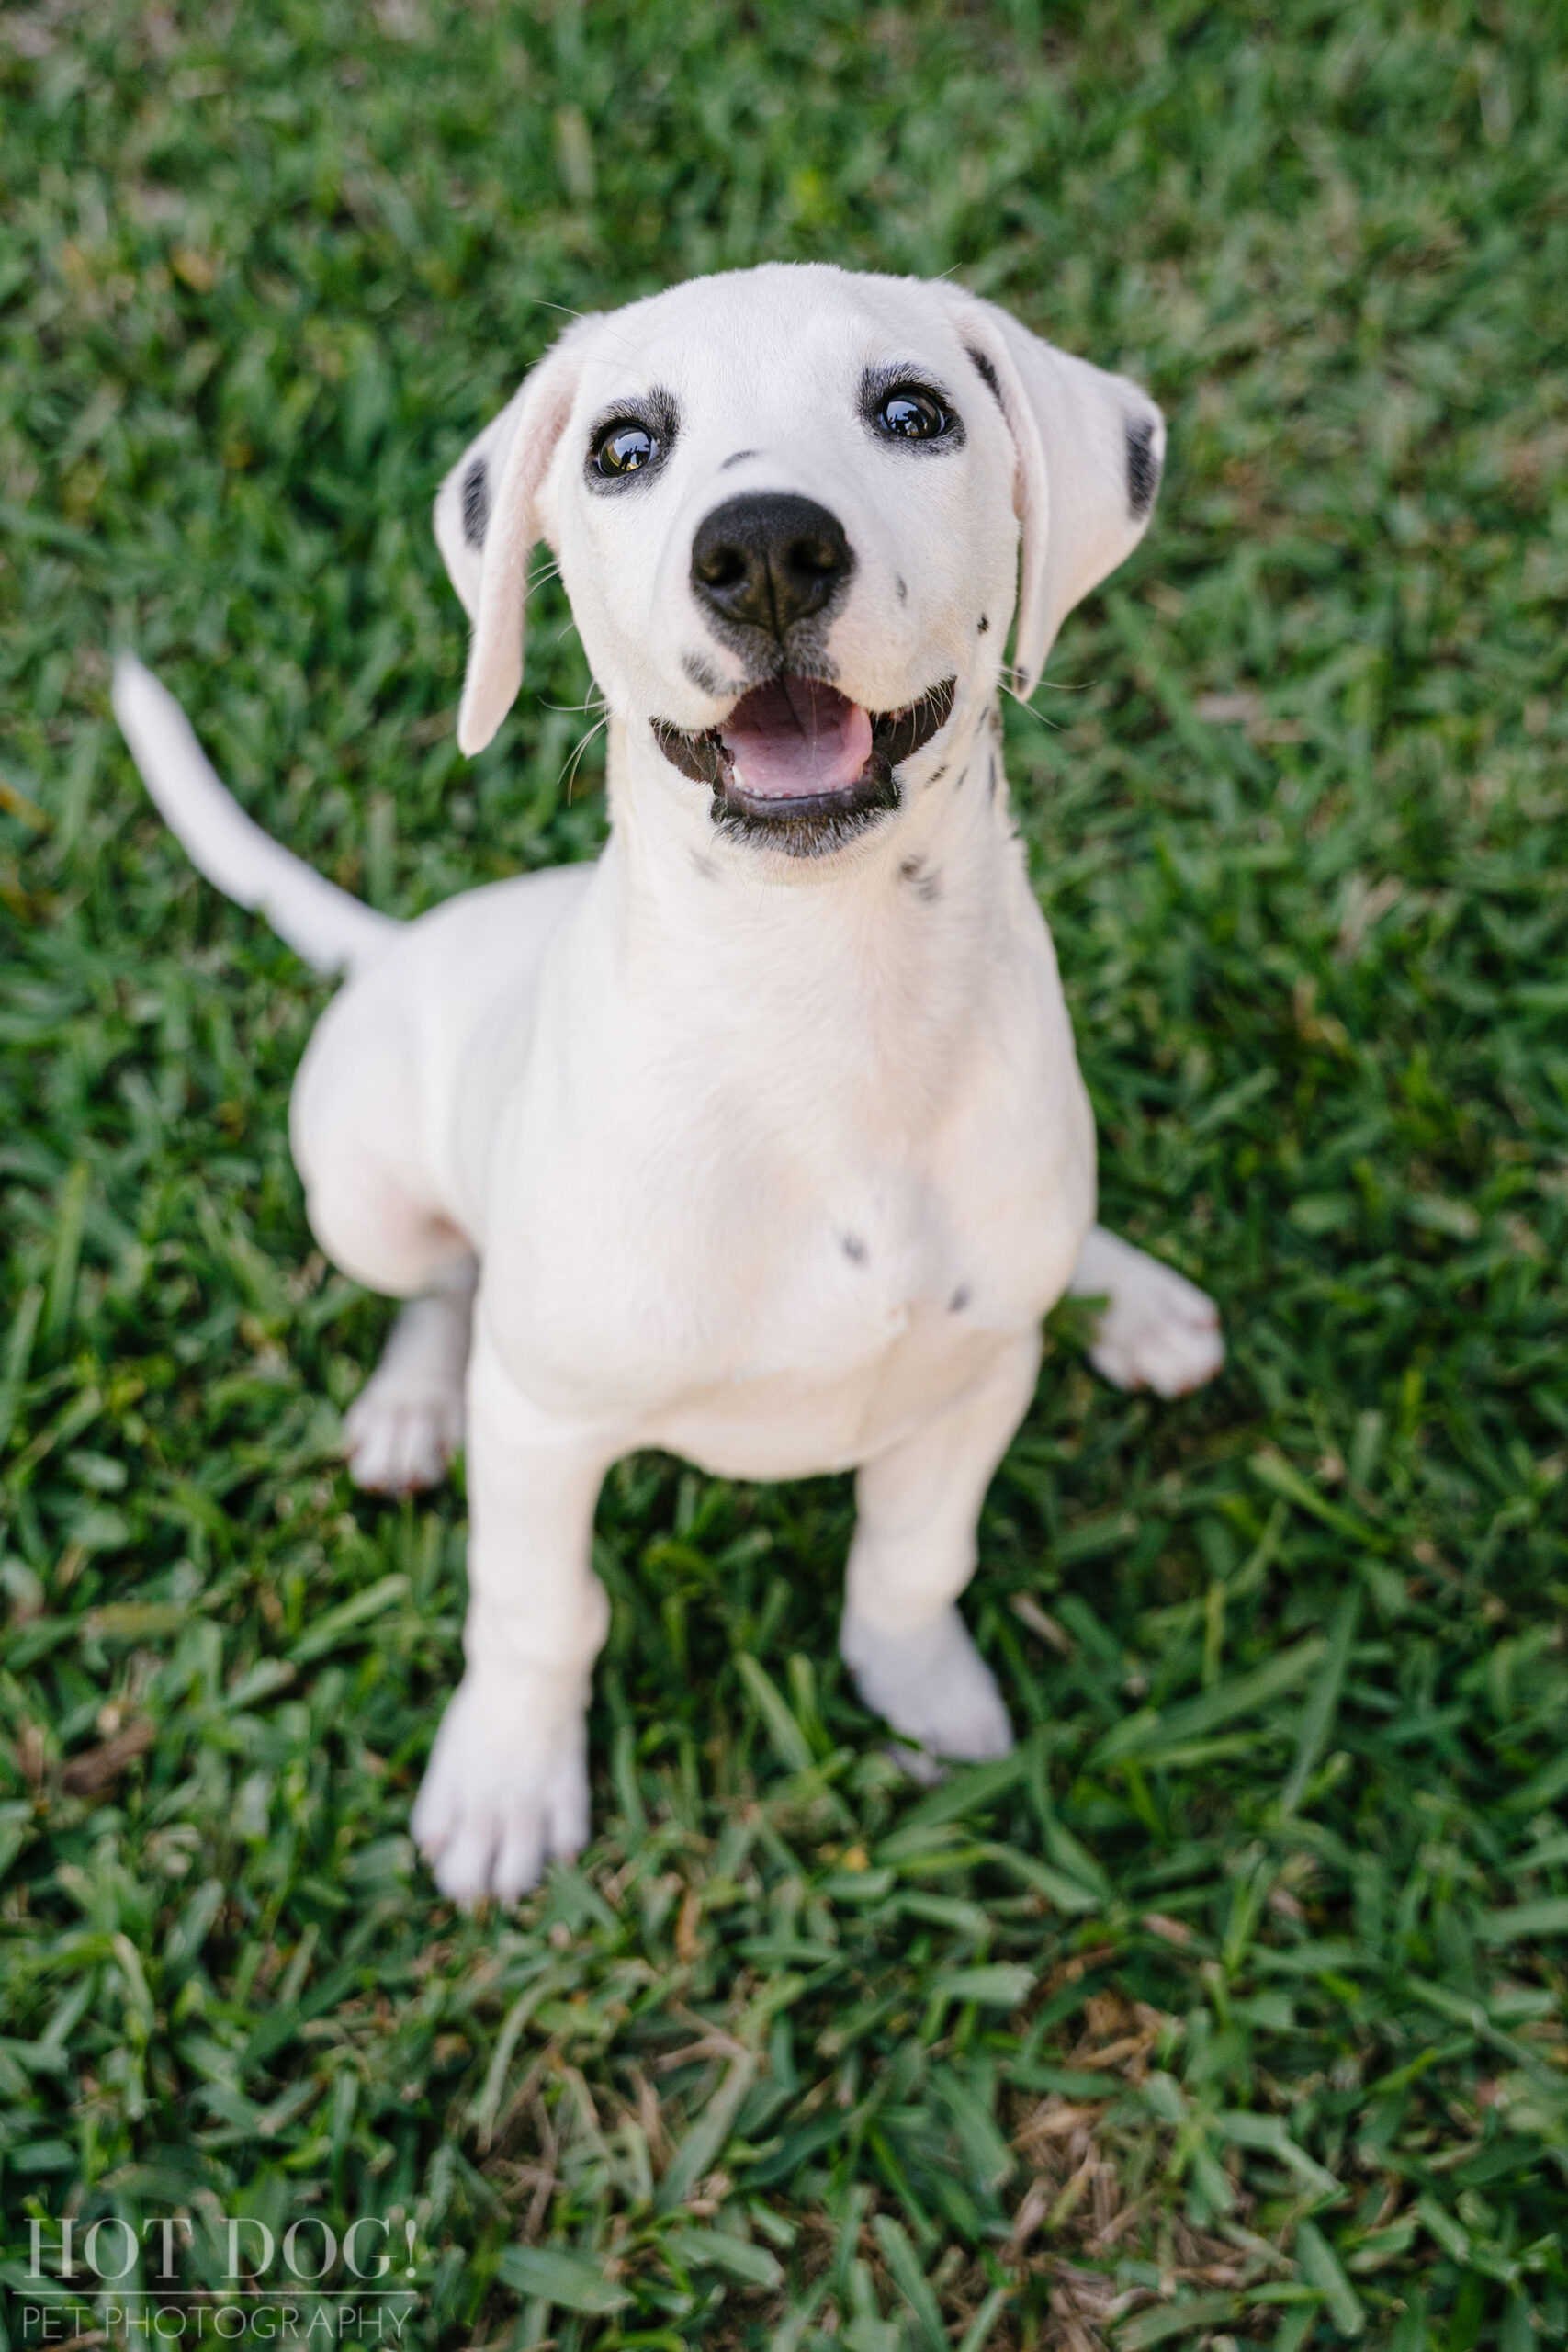 A photo session in Saint Cloud, FL, with a deaf Dalmatian puppy named Ivy by Hot Dog! Pet Photography